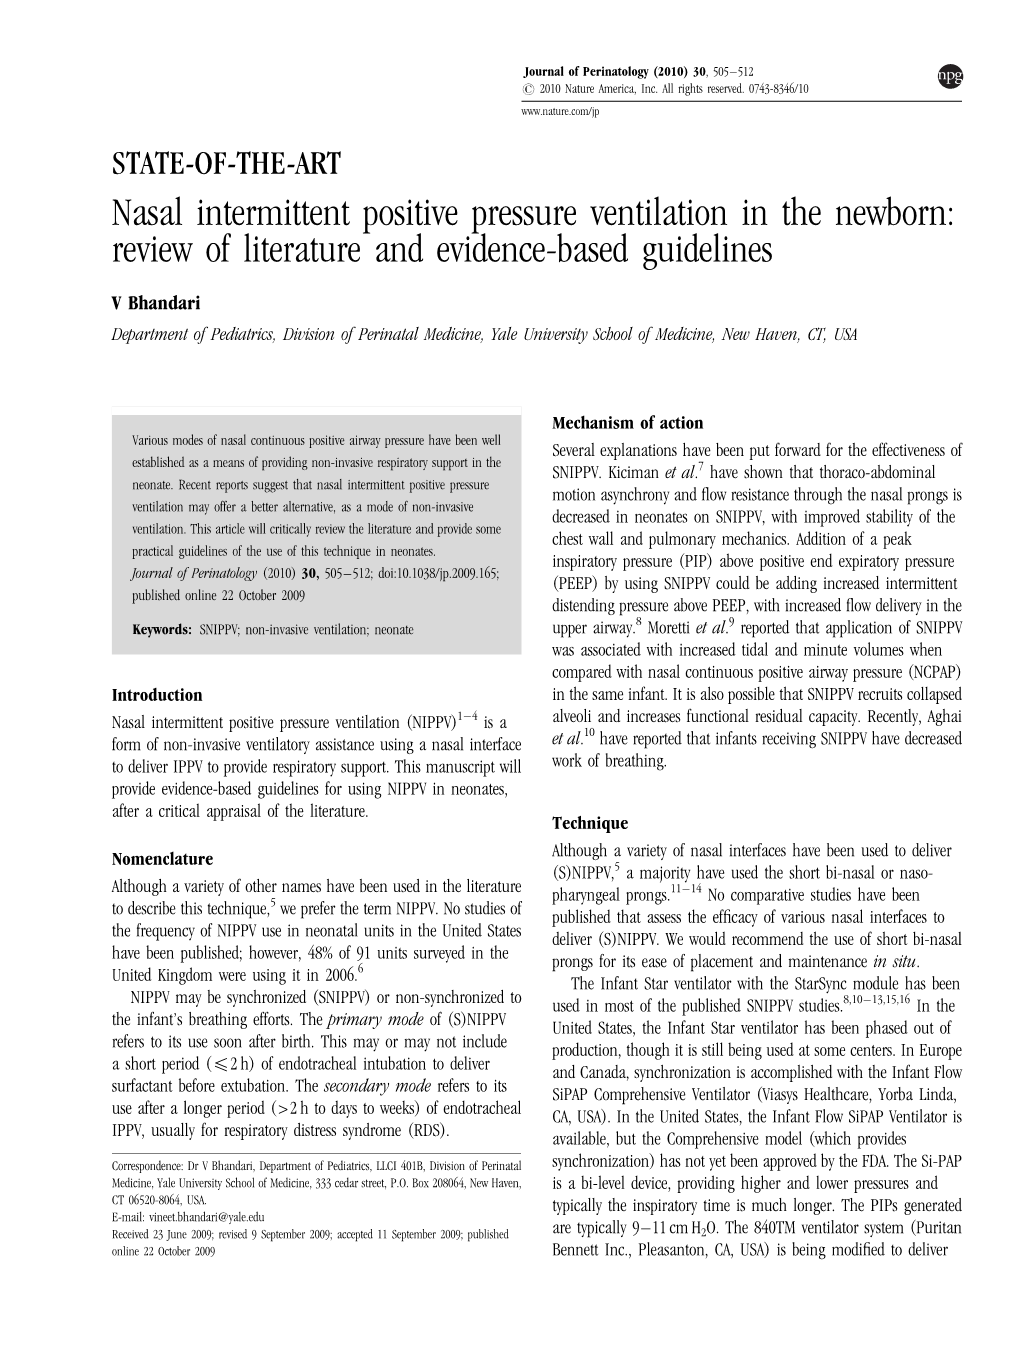 Nasal Intermittent Positive Pressure Ventilation in the Newborn: Review of Literature and Evidence-Based Guidelines